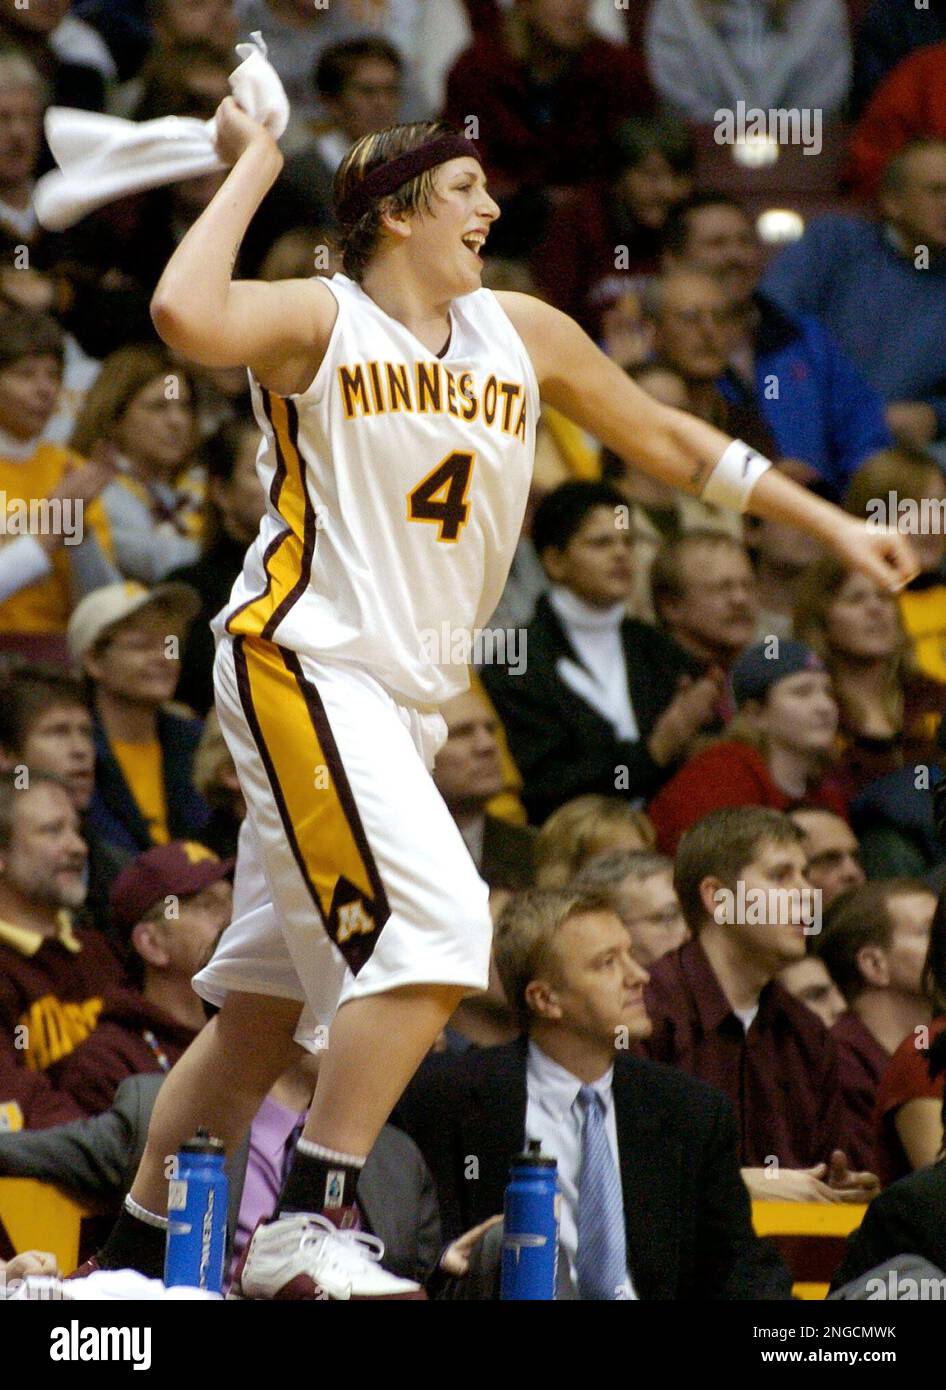 https://c8.alamy.com/comp/2NGCMWK/minnesotas-janel-mccarville-4-comes-off-the-bench-to-celebrate-minnesotas-81-50-win-over-iowa-during-the-closing-minutes-of-the-second-half-thursday-feb-3-2005-in-minneapolis-mccarville-added-16-points-and-eight-rebounds-for-the-gophers-ap-phototom-olmscheid-2NGCMWK.jpg